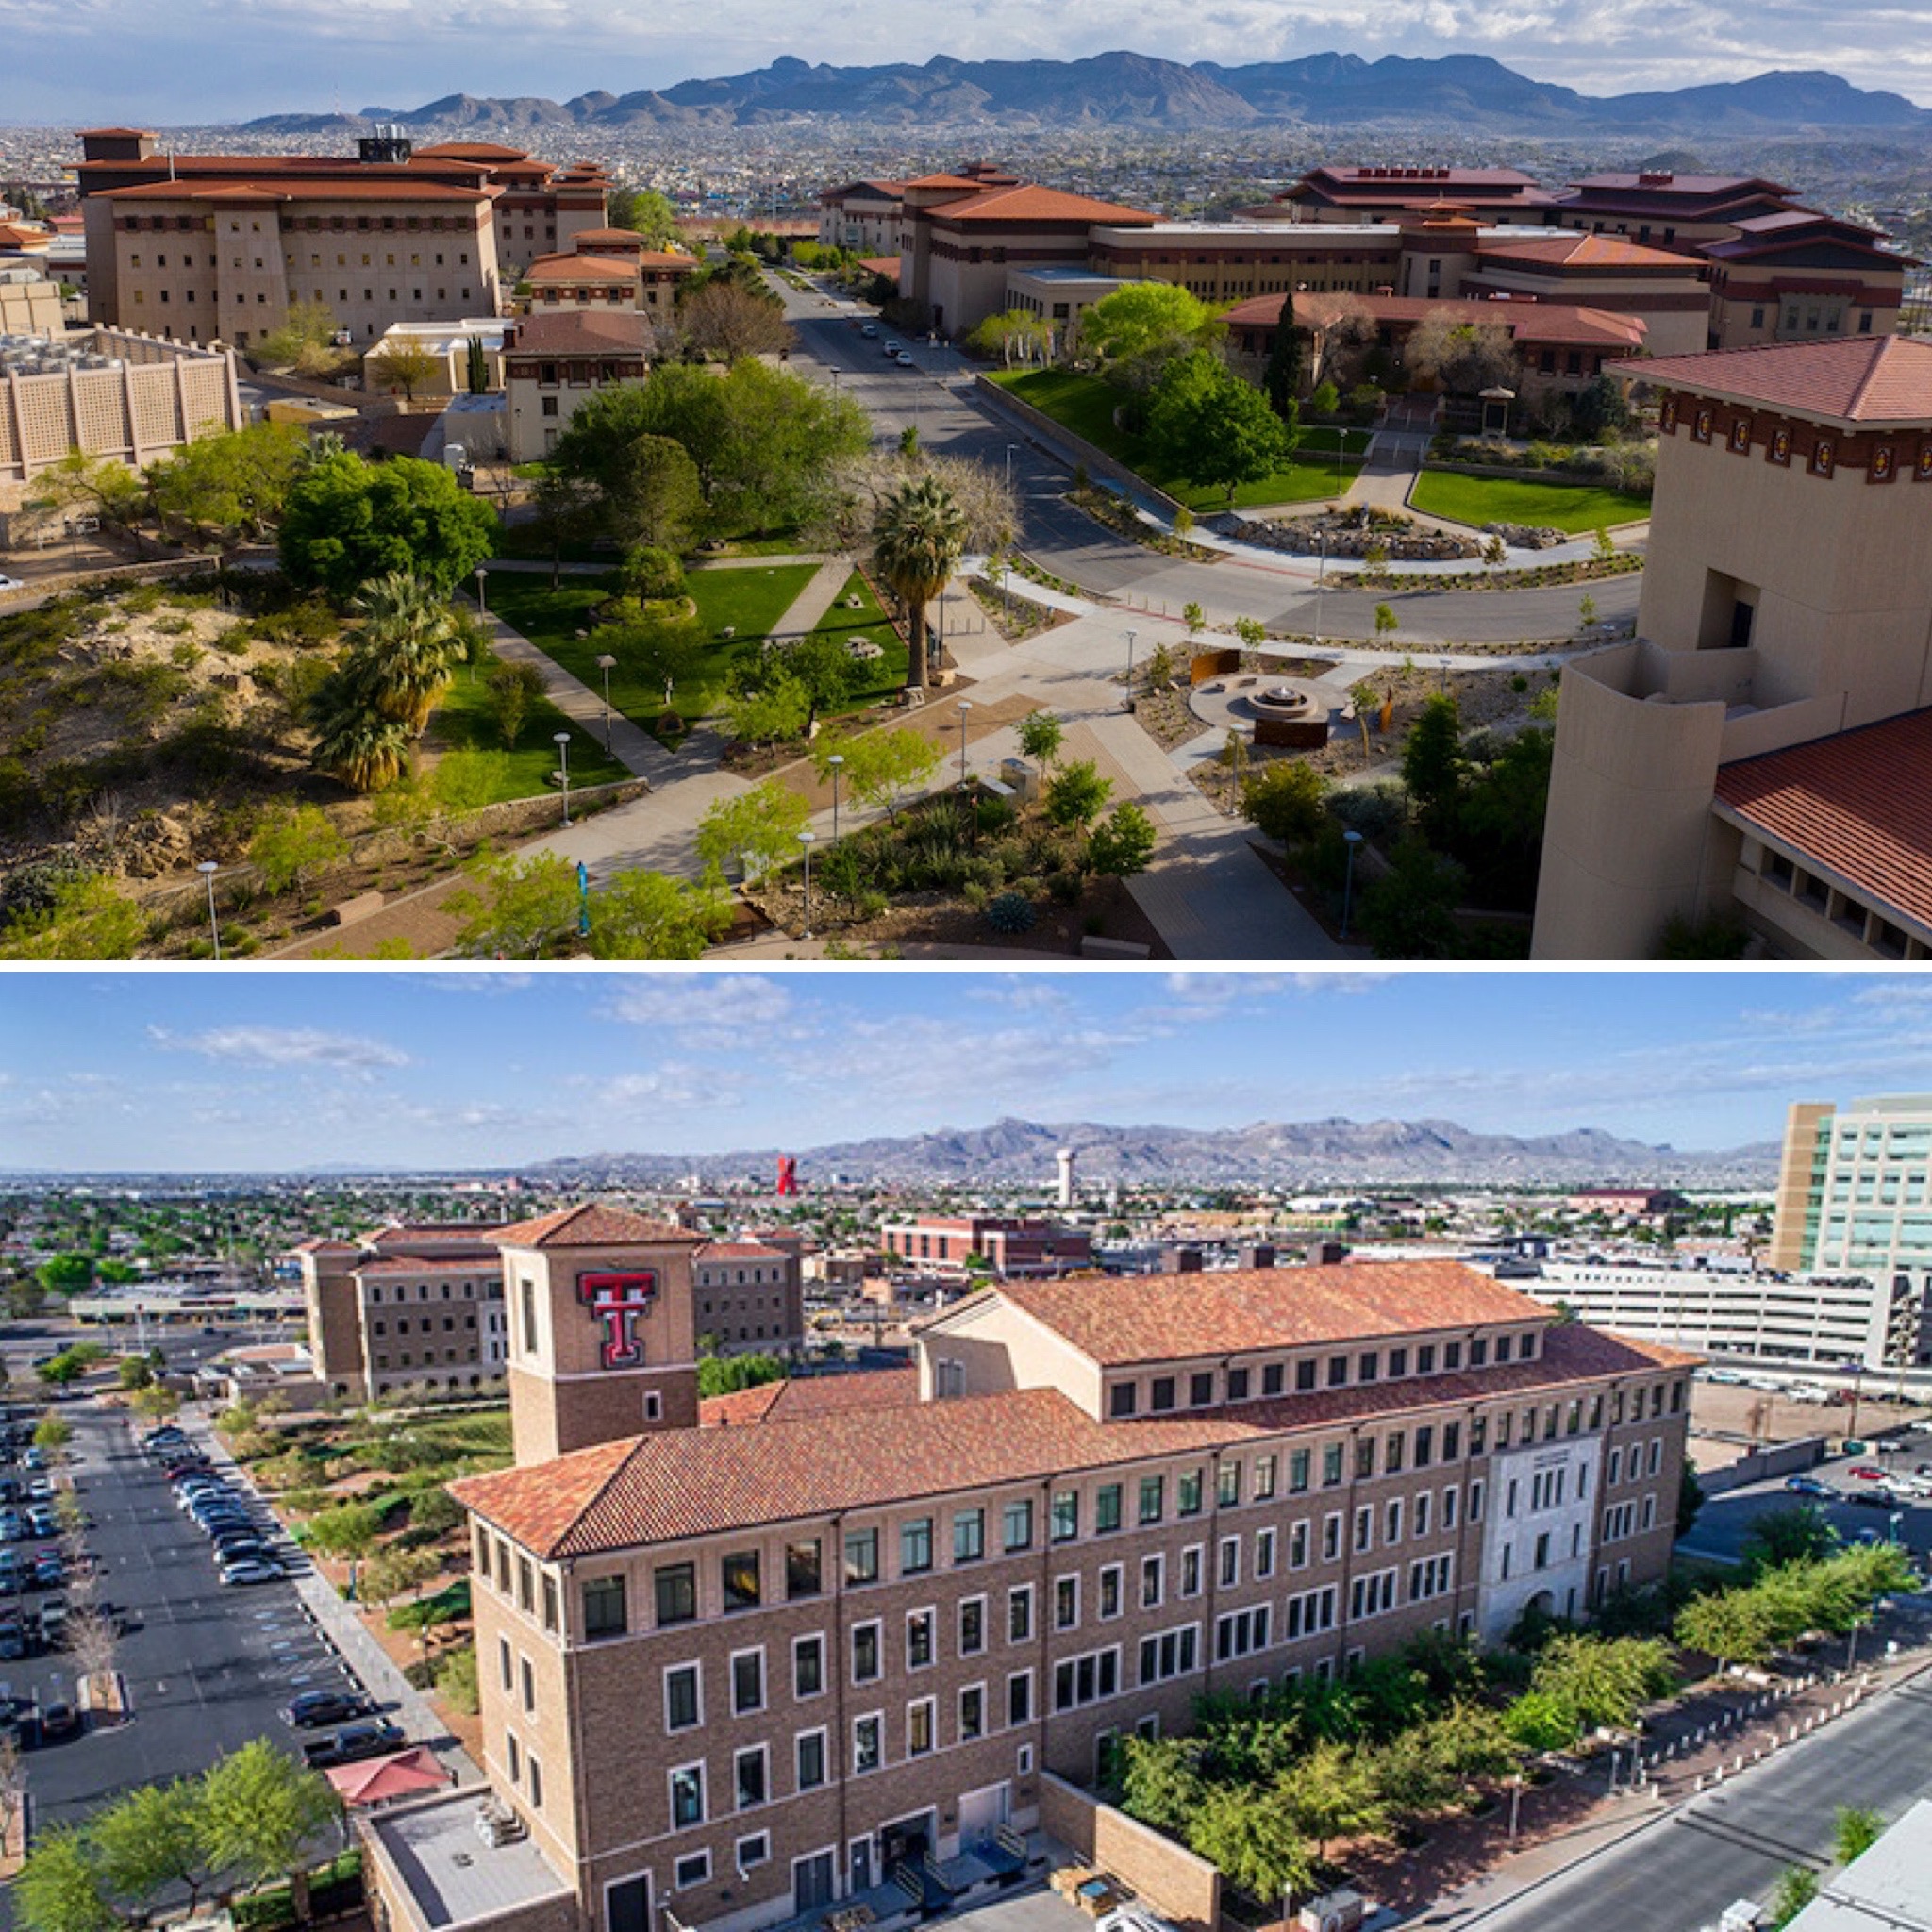 The University of Texas at El Paso and Texas Tech University Health Sciences Center El Paso will expand research into health conditions affecting Hispanics through the establishment of the Sobel-Duncan Border Health Research Award with support from Annette Sobel, M.D., M.S., adjunct professor in the Department of Electrical and Computer Engineering at Texas Tech University in Lubbock, and adjunct professor in the Department of Medical Education and in the School of Nursing at TTUHSC in Lubbock; and Robert Duncan, Ph.D., professor and president’s distinguished chair in physics in the Department of Physics and Astronomy also at Texas Tech University in Lubbock. 